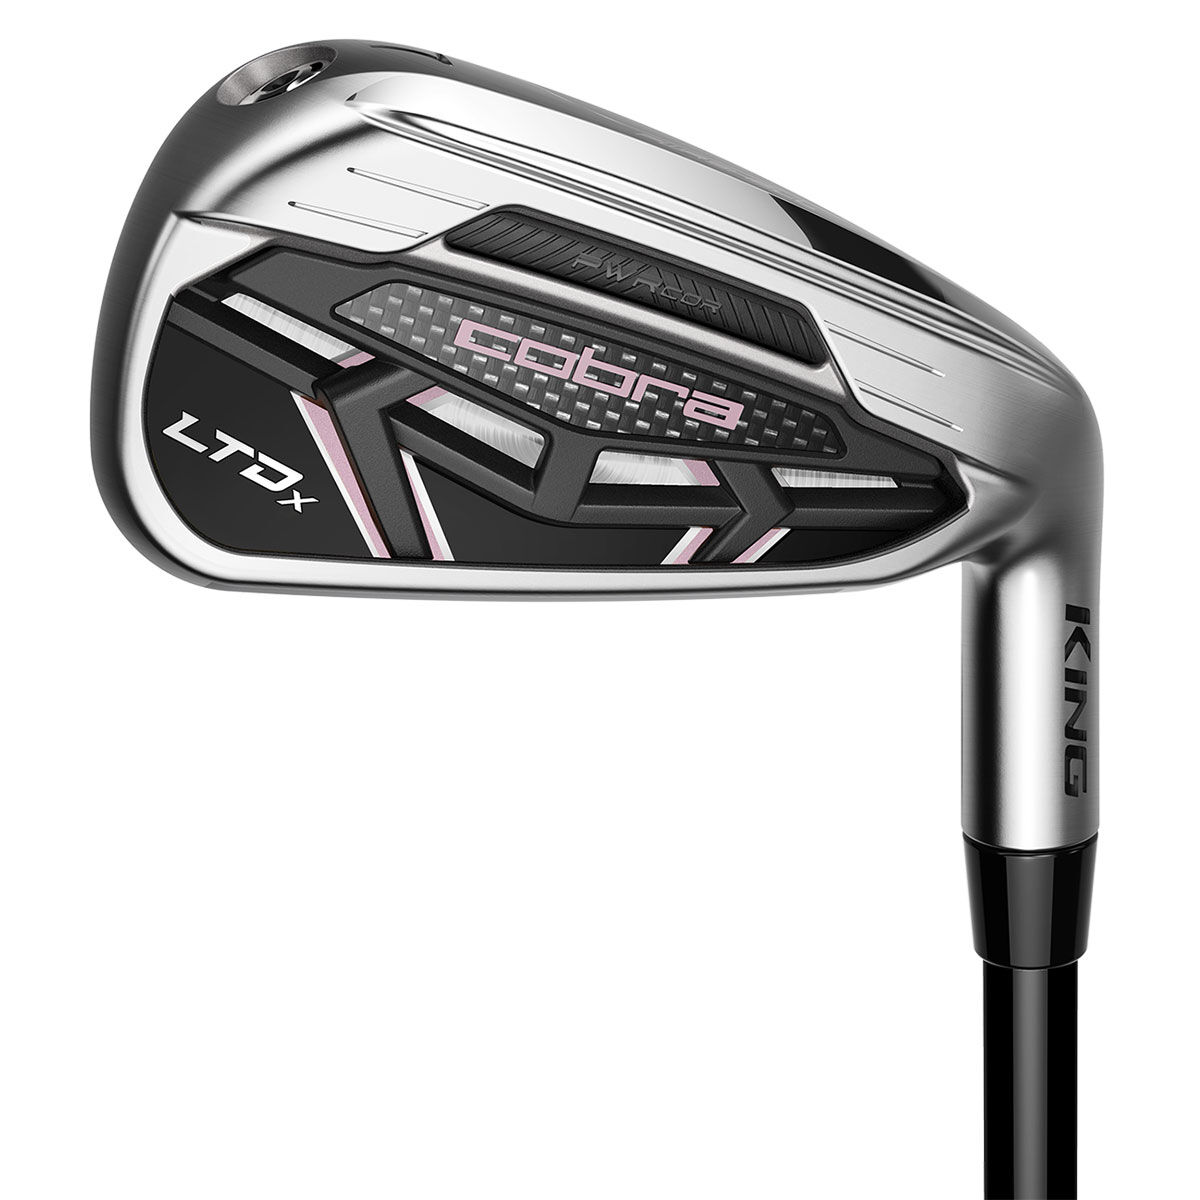 Cobra Golf Womens Black and Silver King LTDx Right Hand Graphite 6-sw 6 Golf Irons | American Golf, One Size